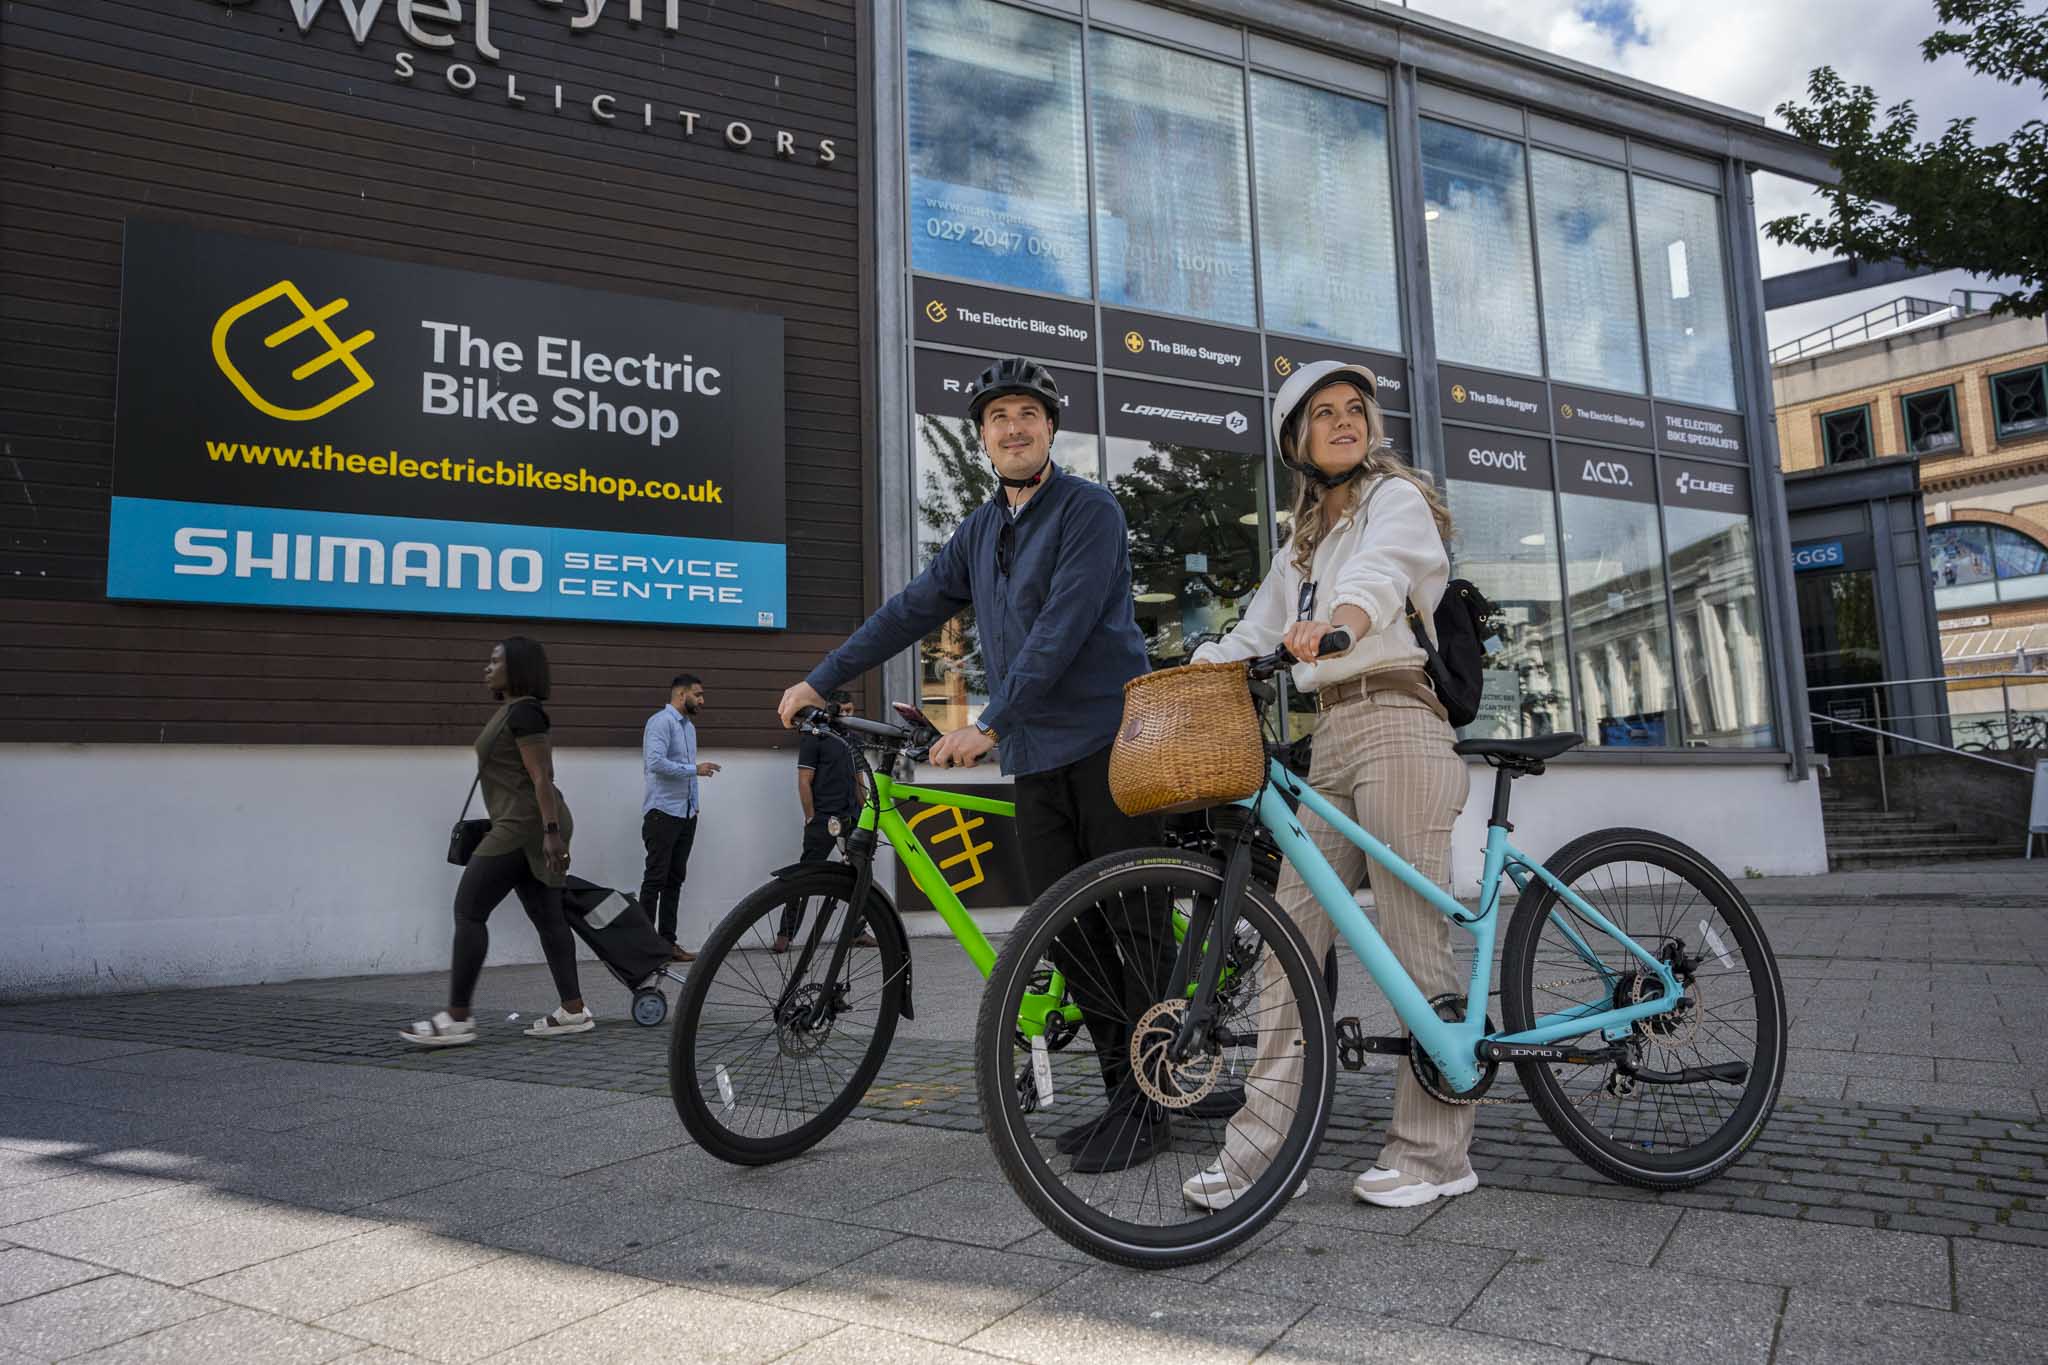 How to get an Estarli: purchase direct, utilise a cycle scheme, purchase from a store near you or pay monthly and own later